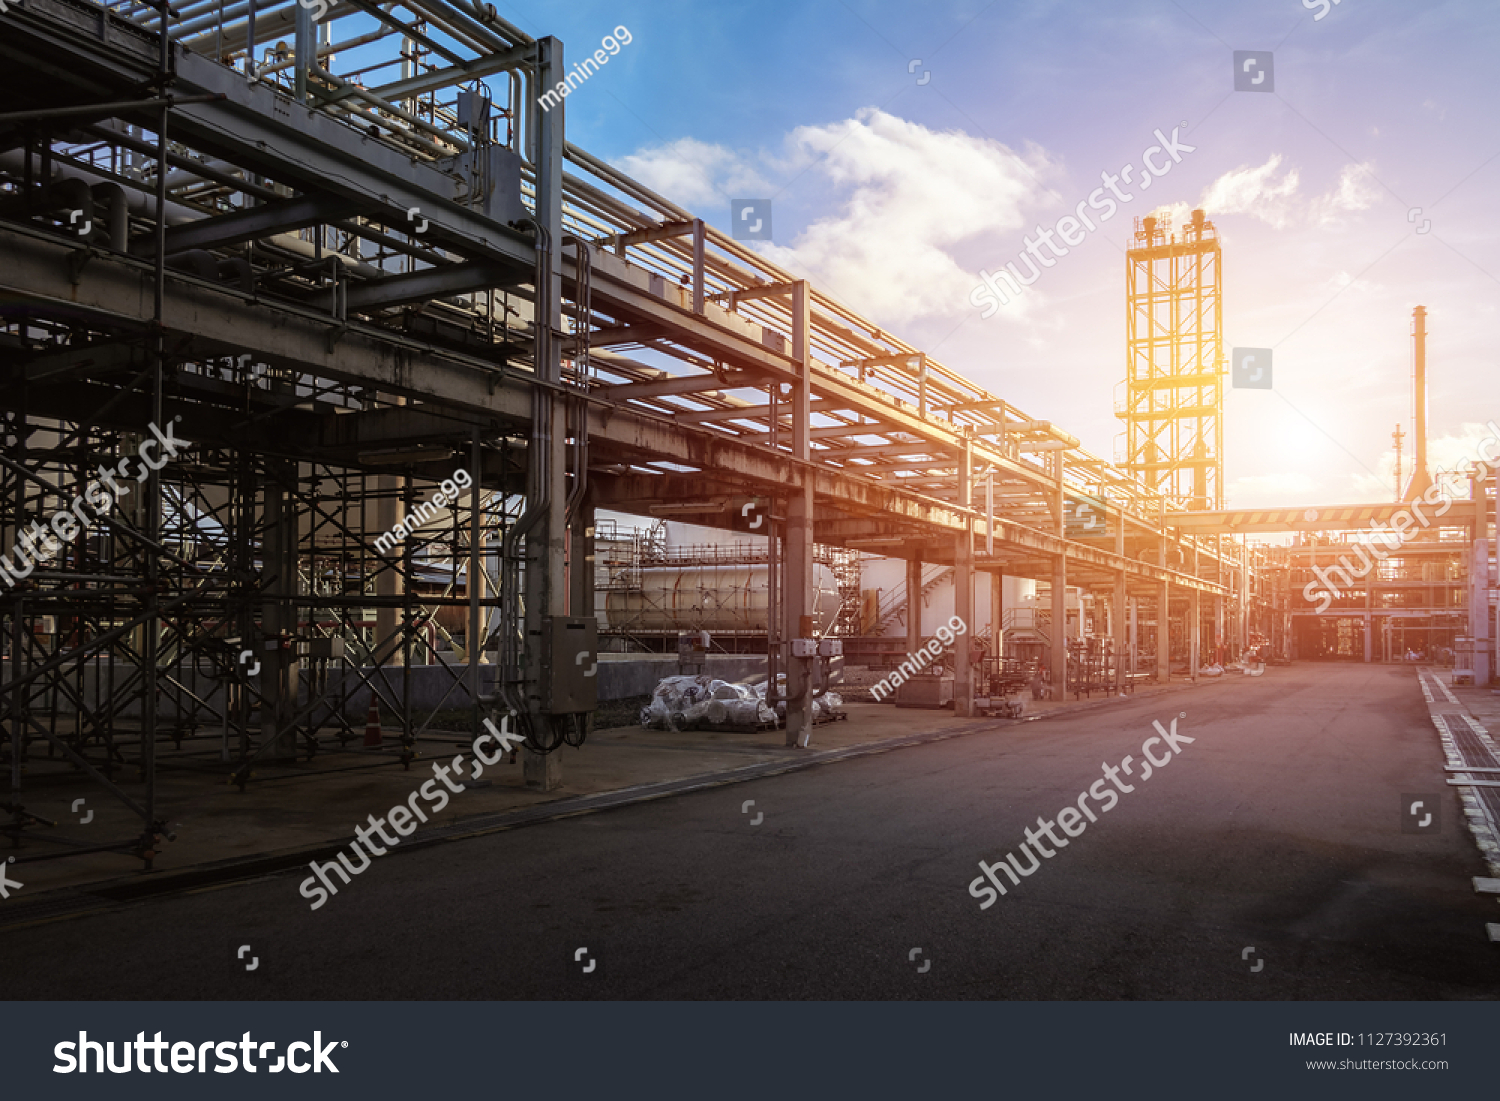 Pipeline and pipe rack of petroleum industrial plant with sunset sky background #1127392361